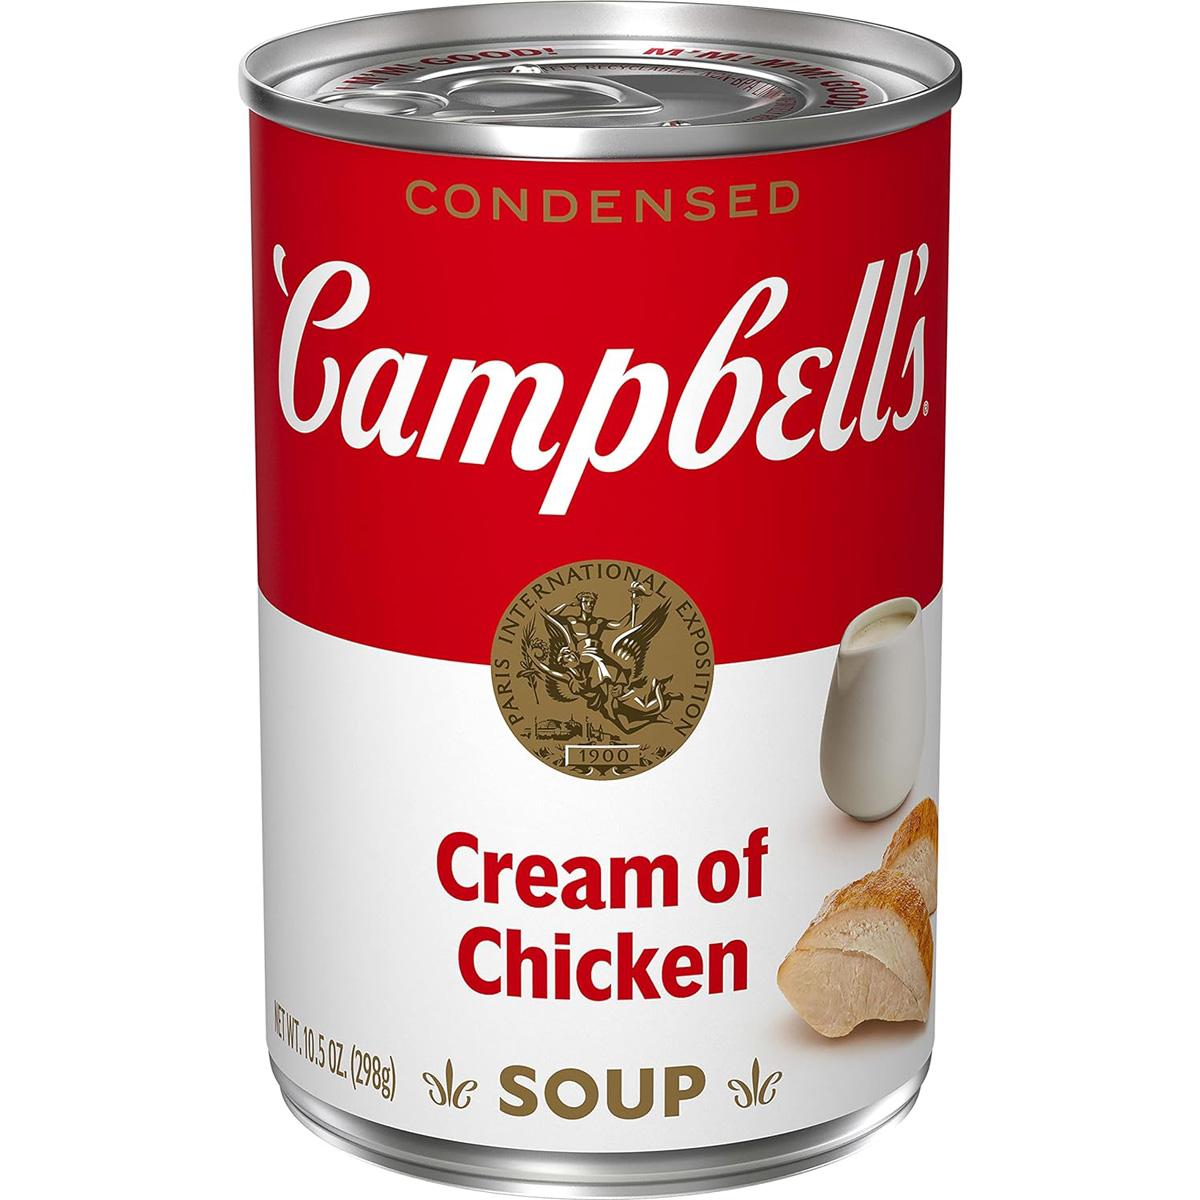 Campbells Condensed Cream of Chicken Soup for $0.75 Shipped